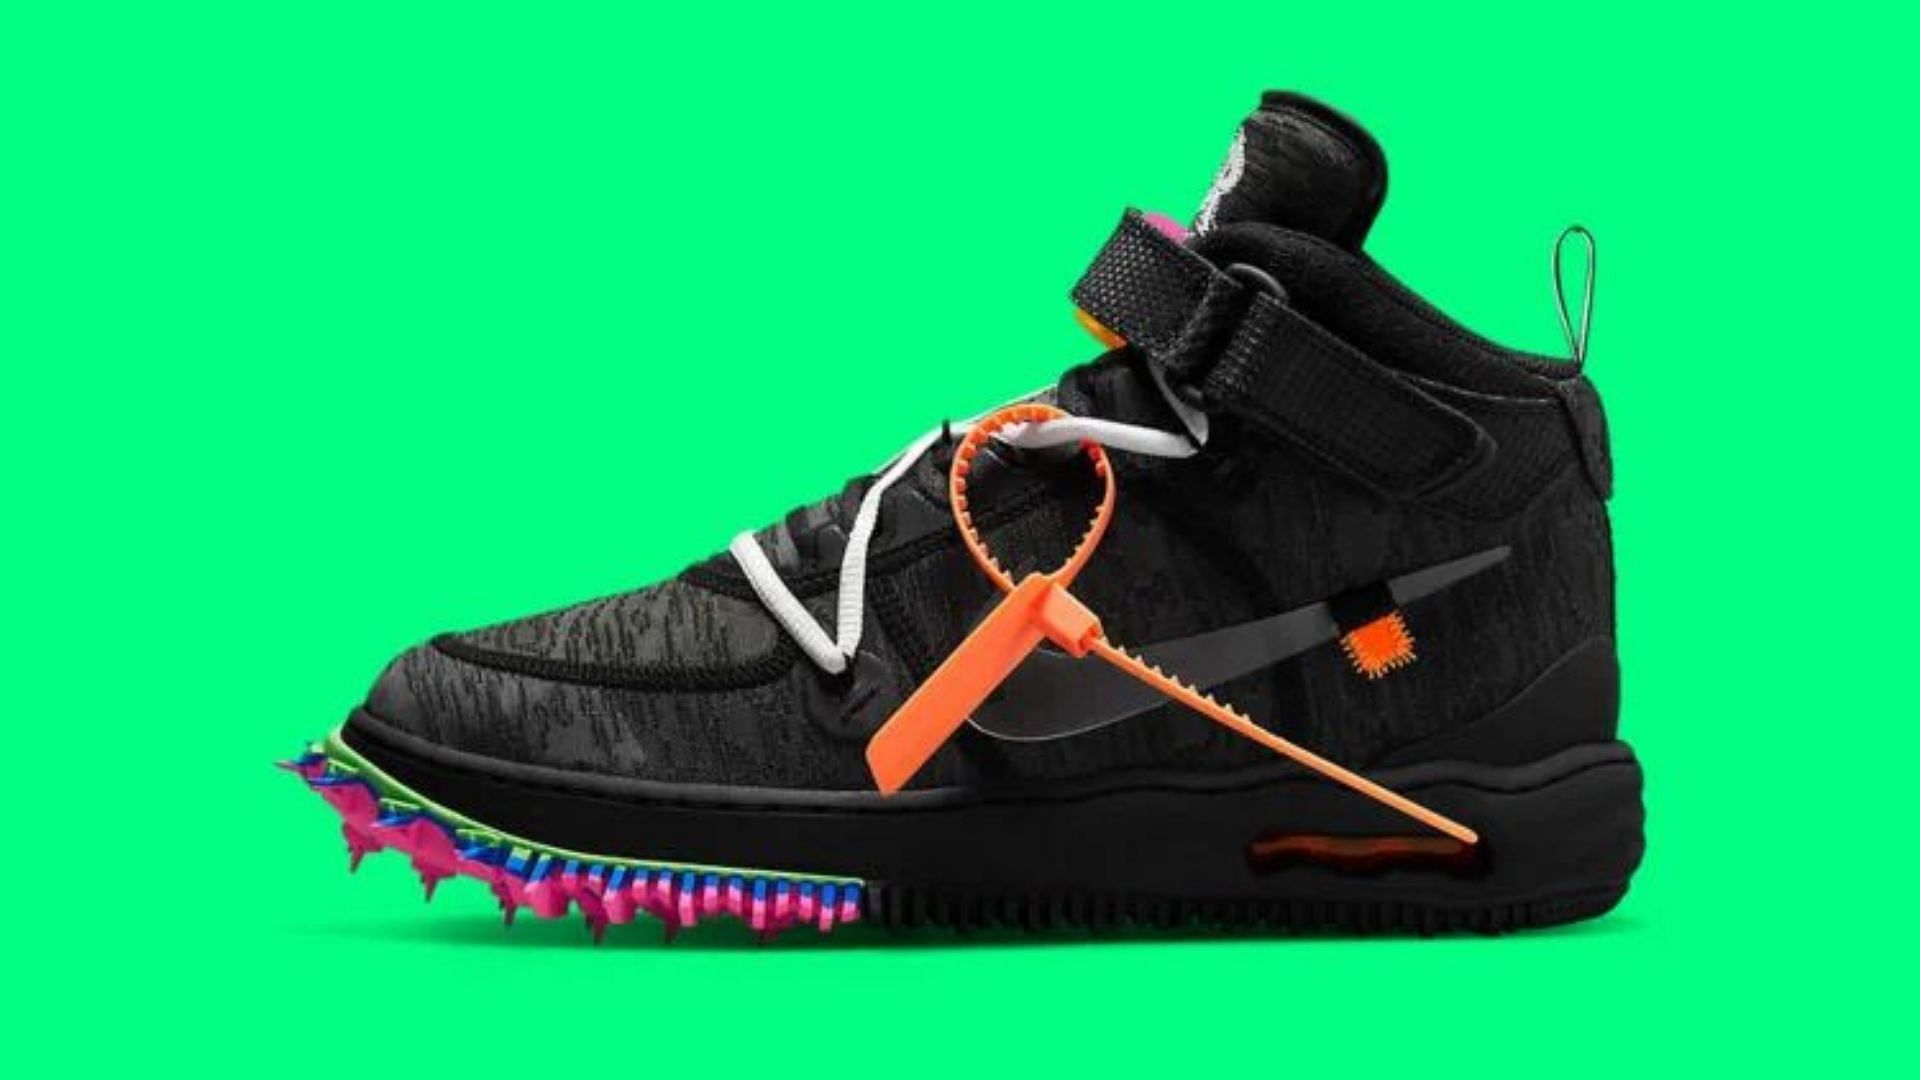 Take a look at the upcoming Off-White x Nike sneakers (Image via Nike)